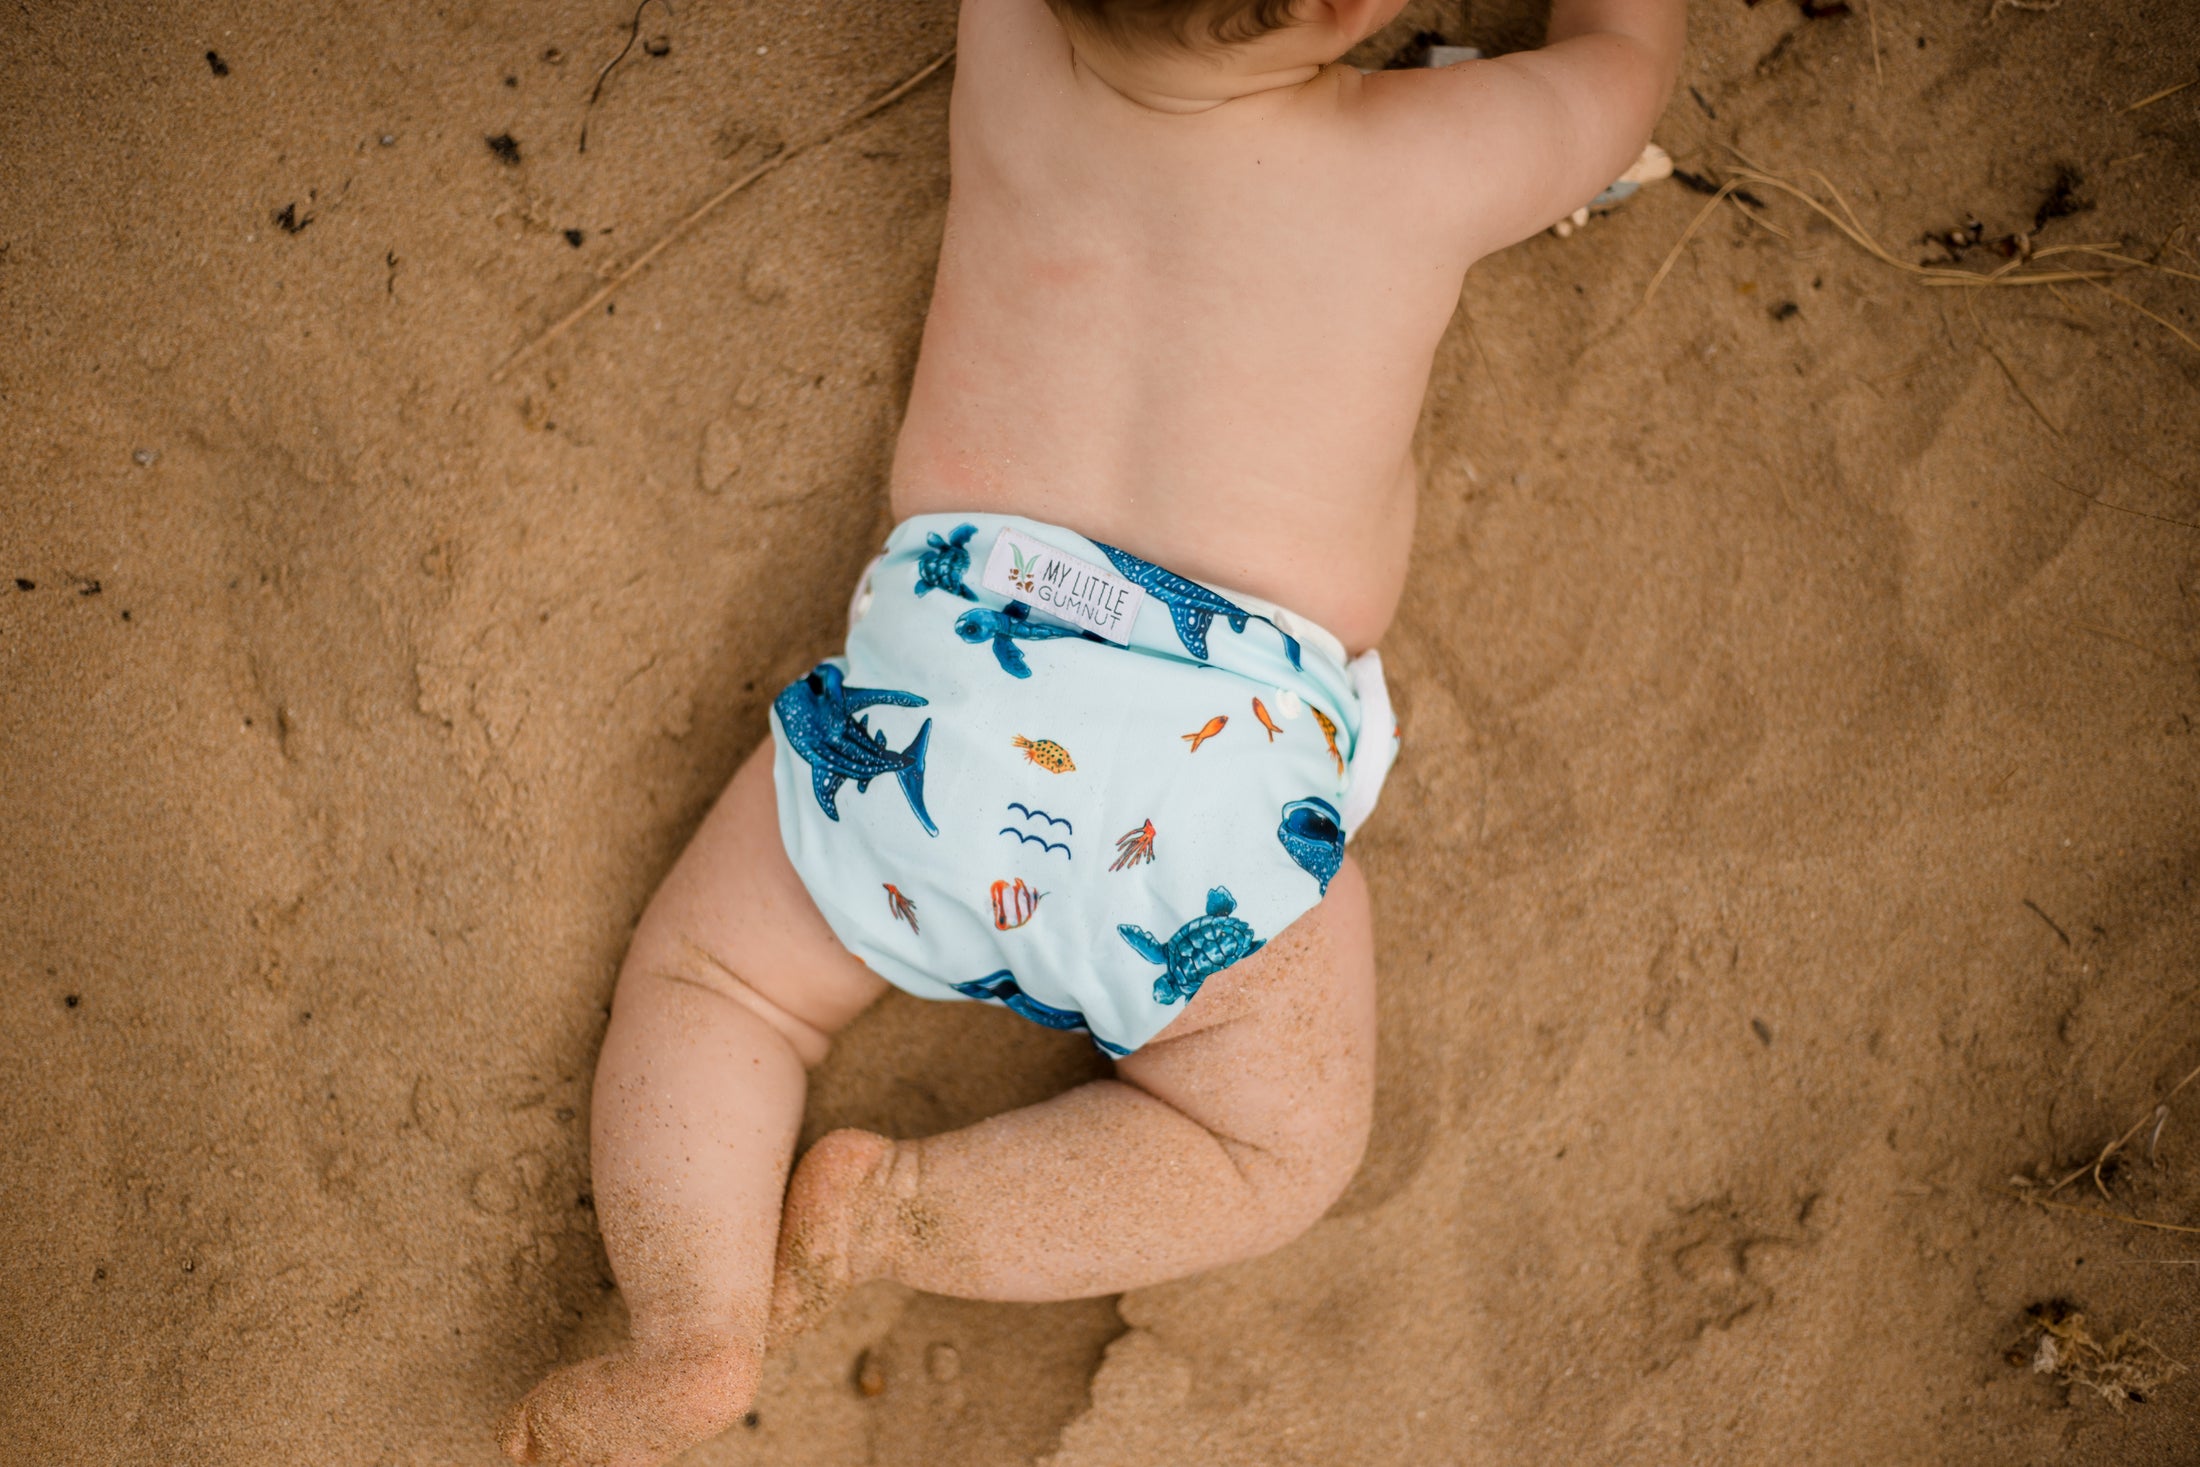 Beach baby wearing Marine Life Swimming Nappy. Reusable swimming nappy at the beach. My Little Gumnut.